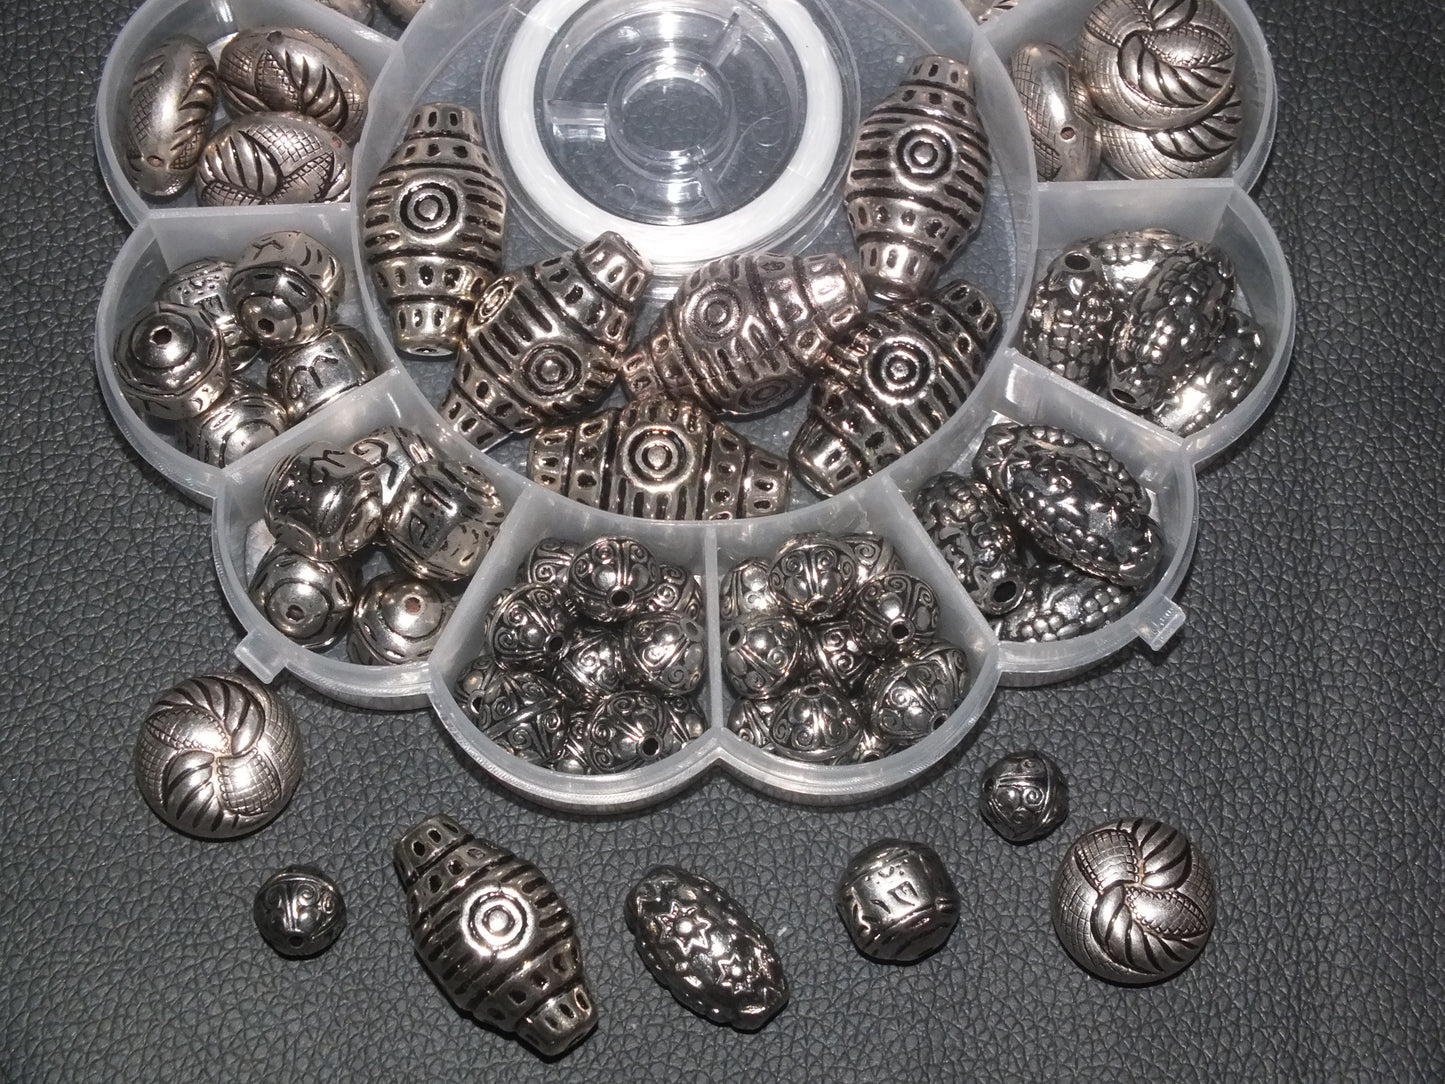 Box of large silver tone beads plus a roll of elastic. 12mm - 33mm mix, 80pcs.